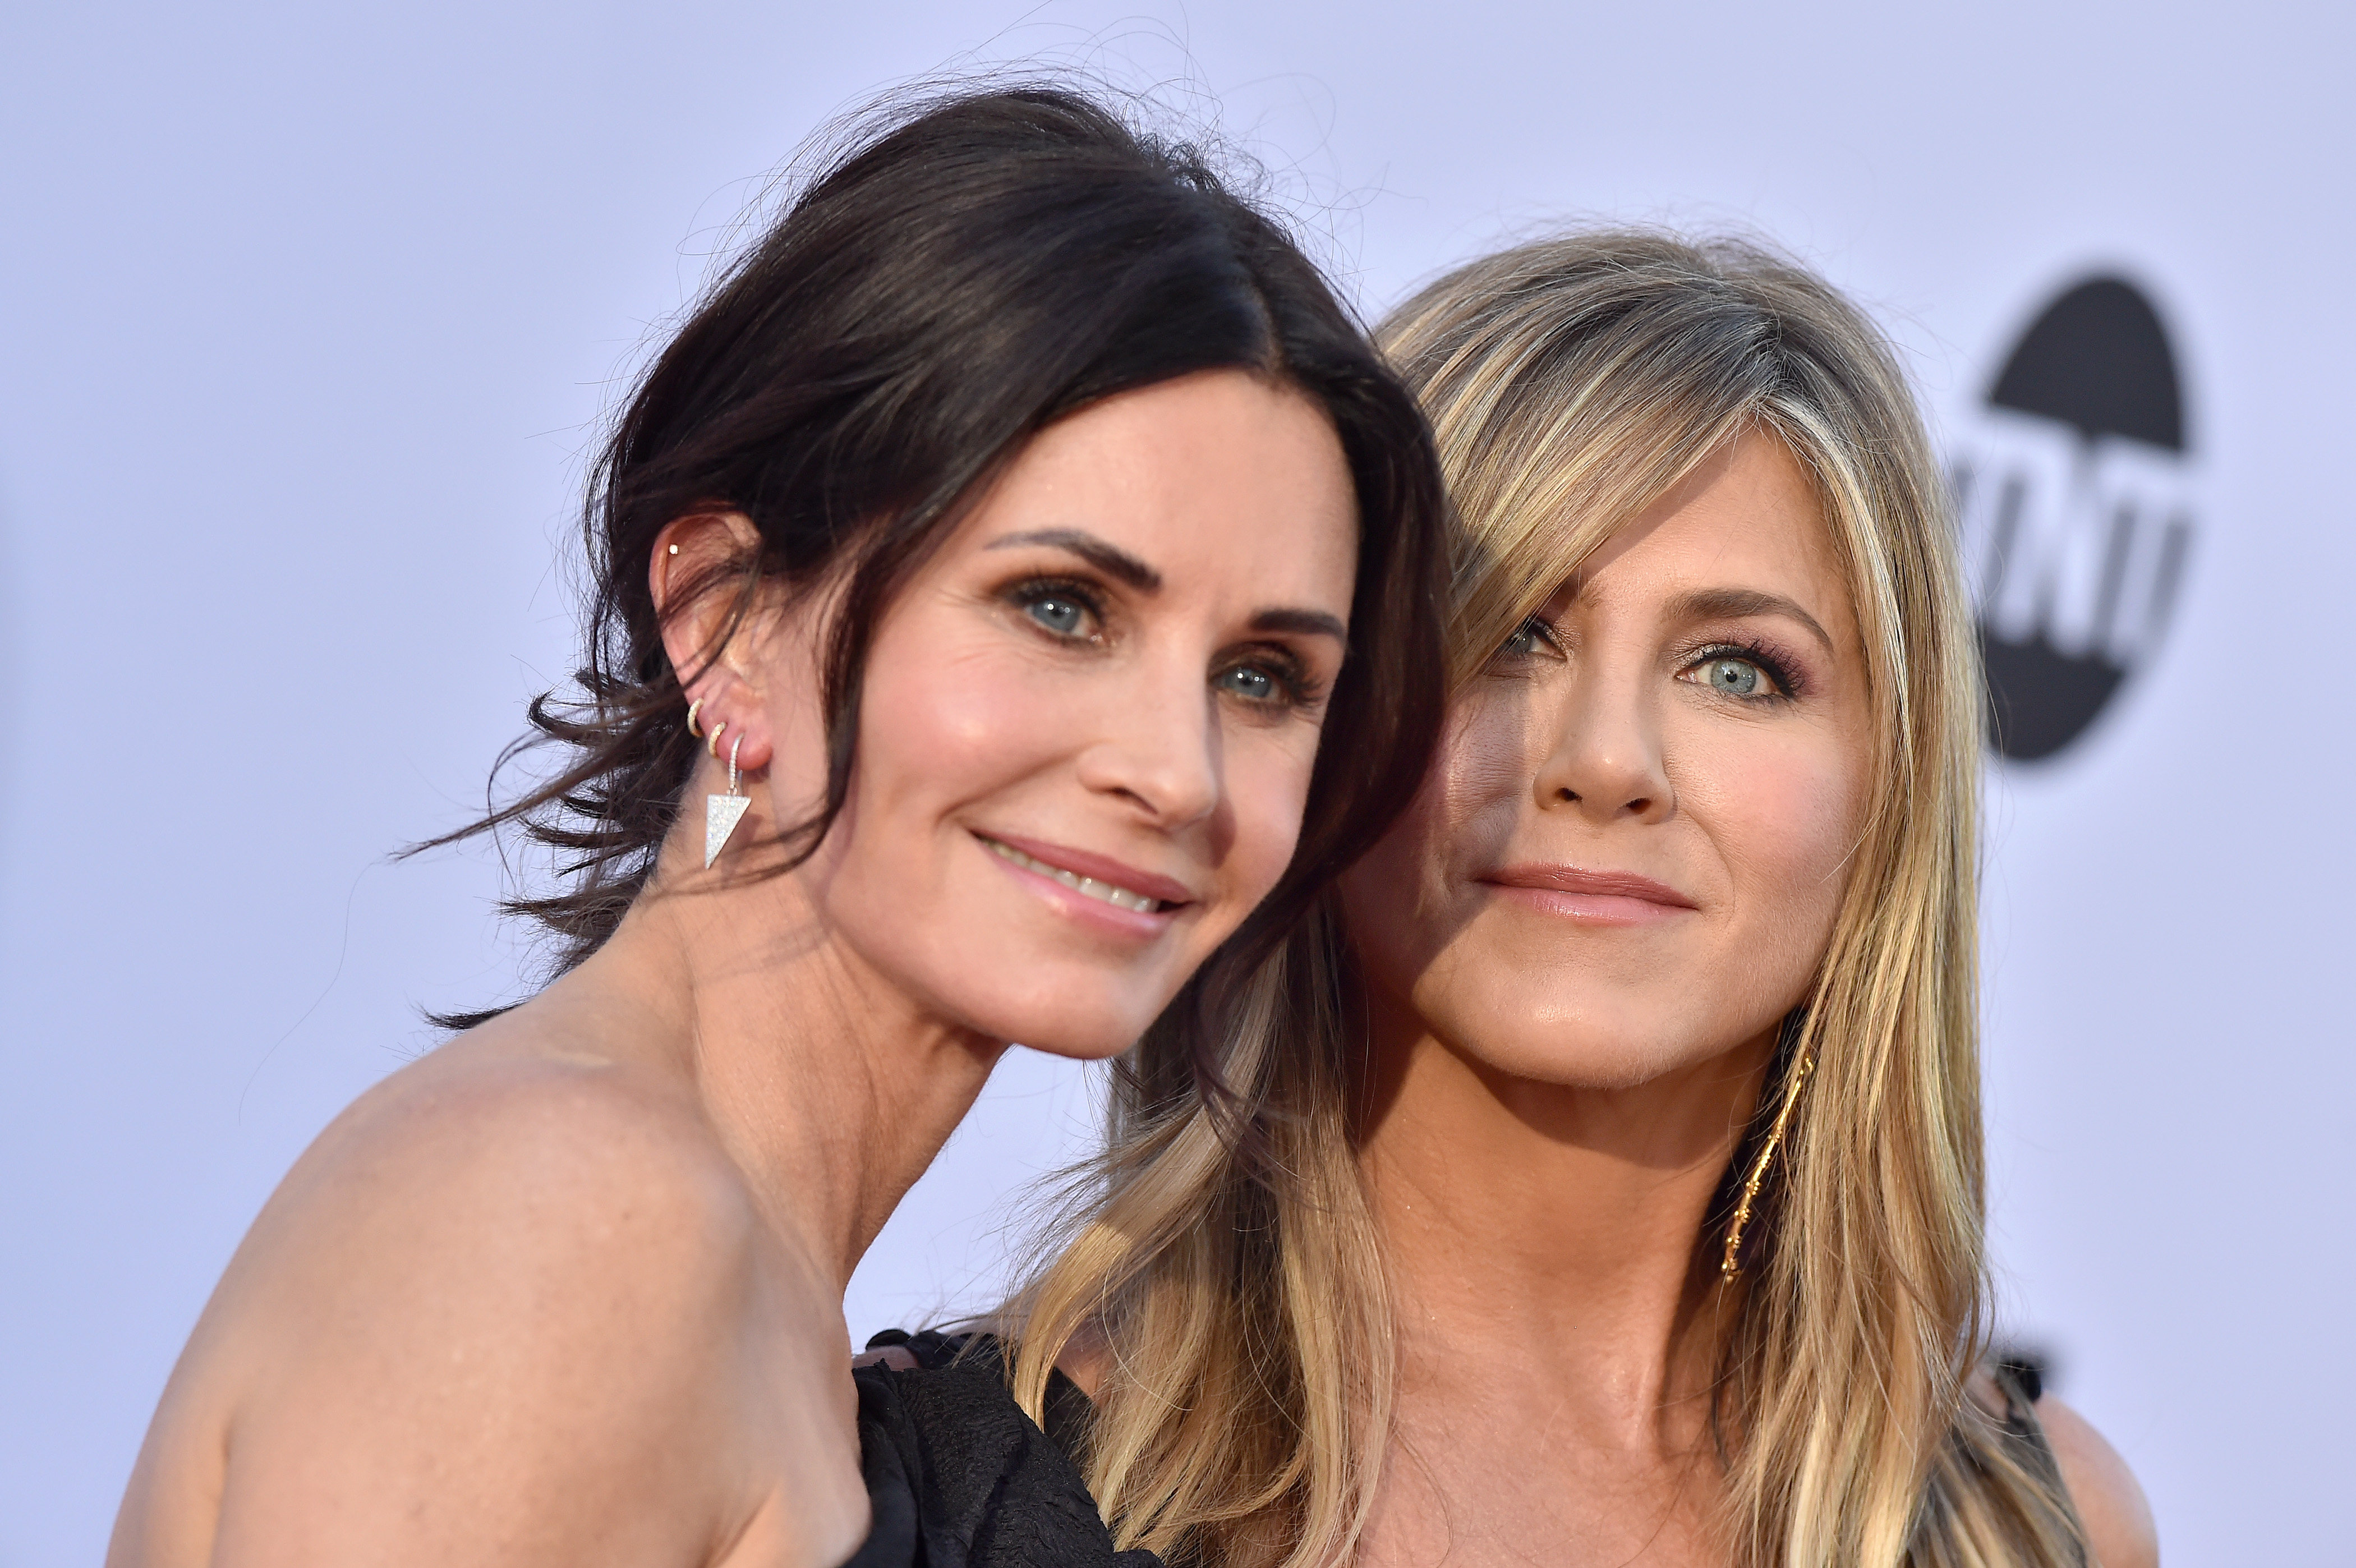 Courteney Cox and Jennifer Aniston arrive at the American Film Institute's 46th Life Achievement Award Gala Tribute to George Clooney